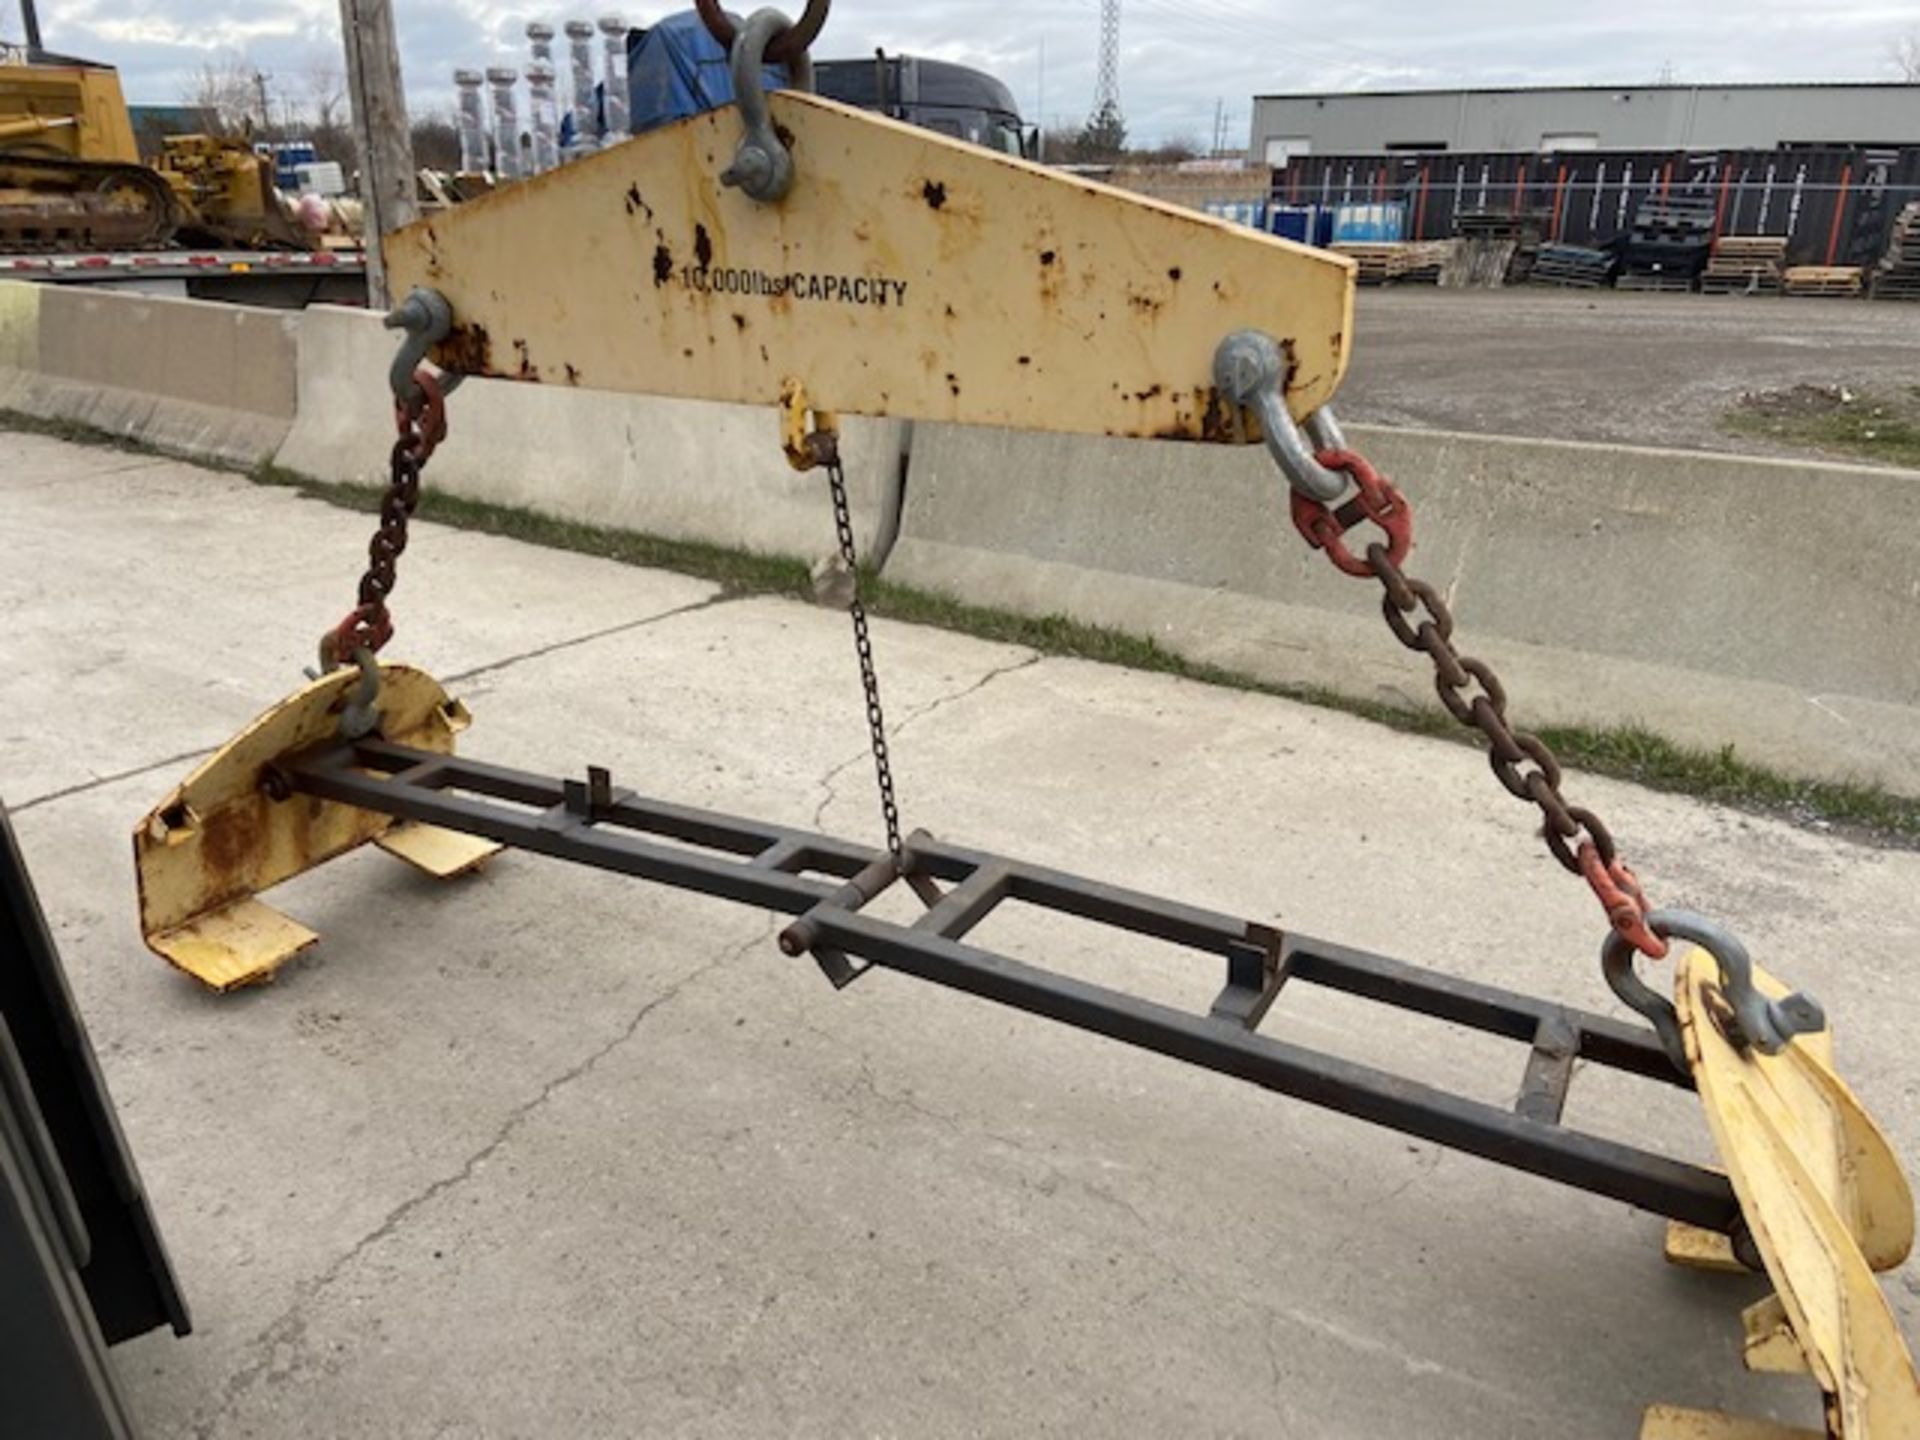 Steel plate or bar lifter - 9' max width or length - capacity 10,000lbs or 5 ton